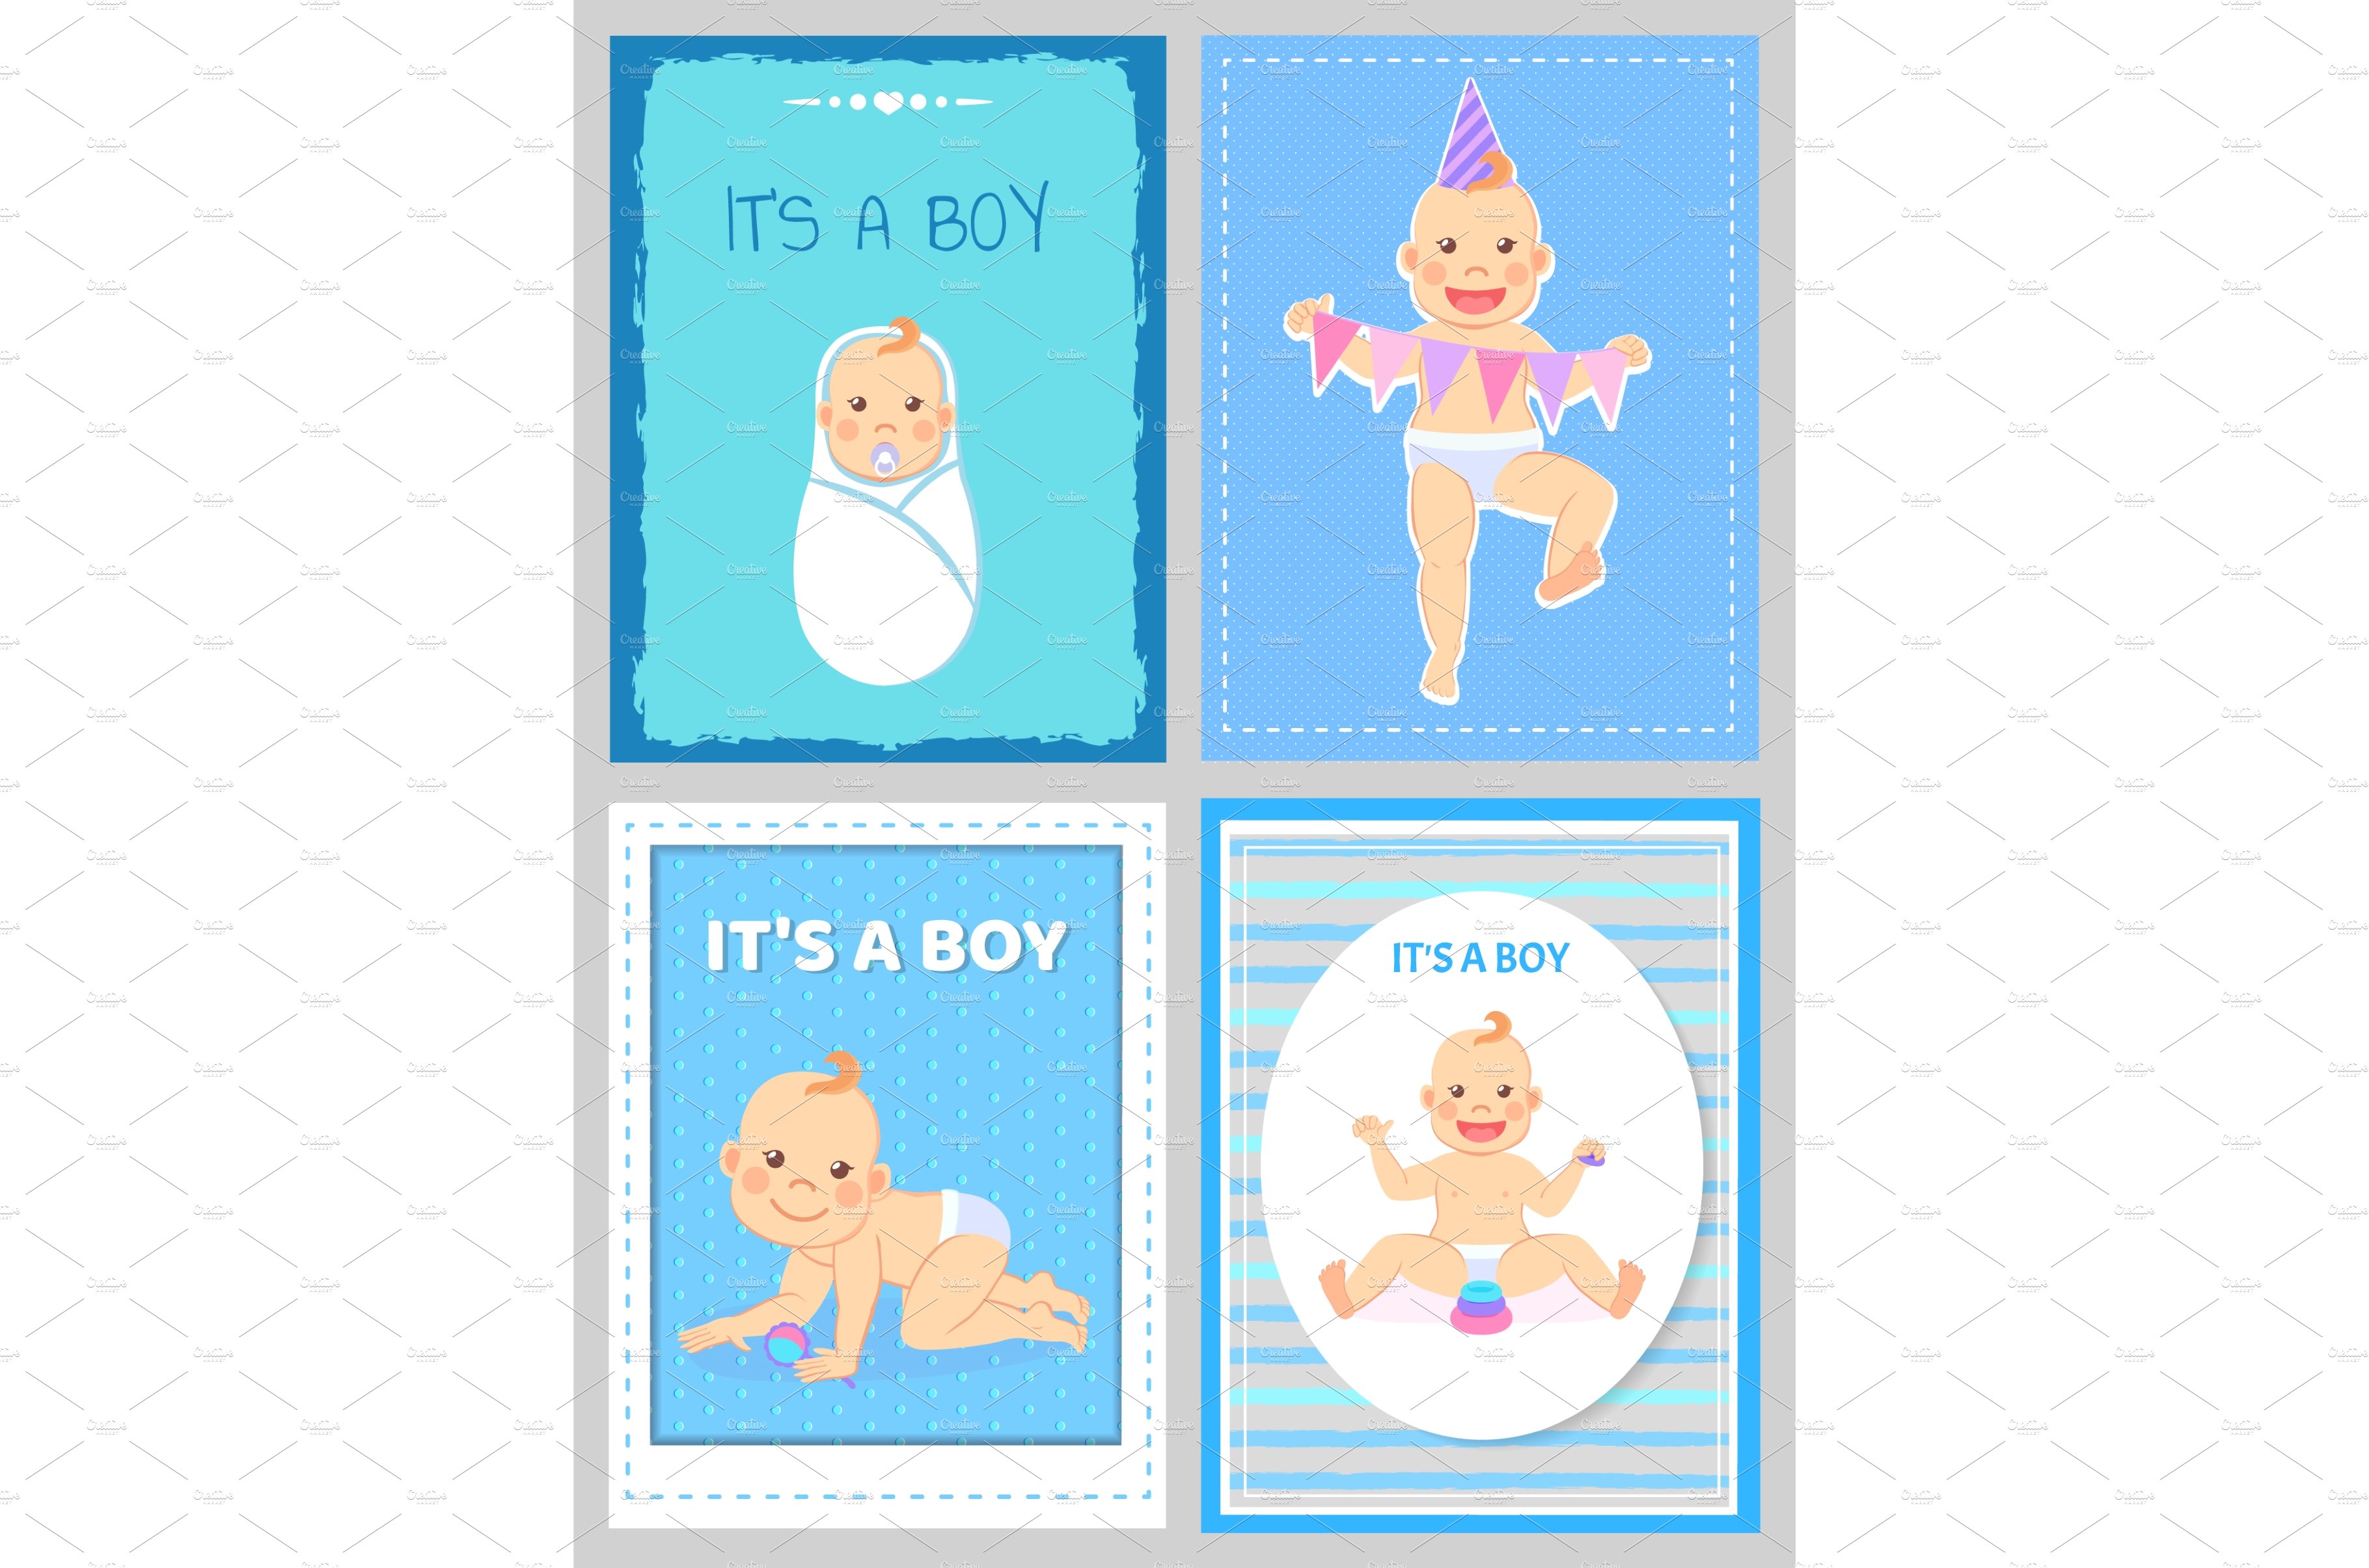 Its a Boy Greeting Card, Baby cover image.